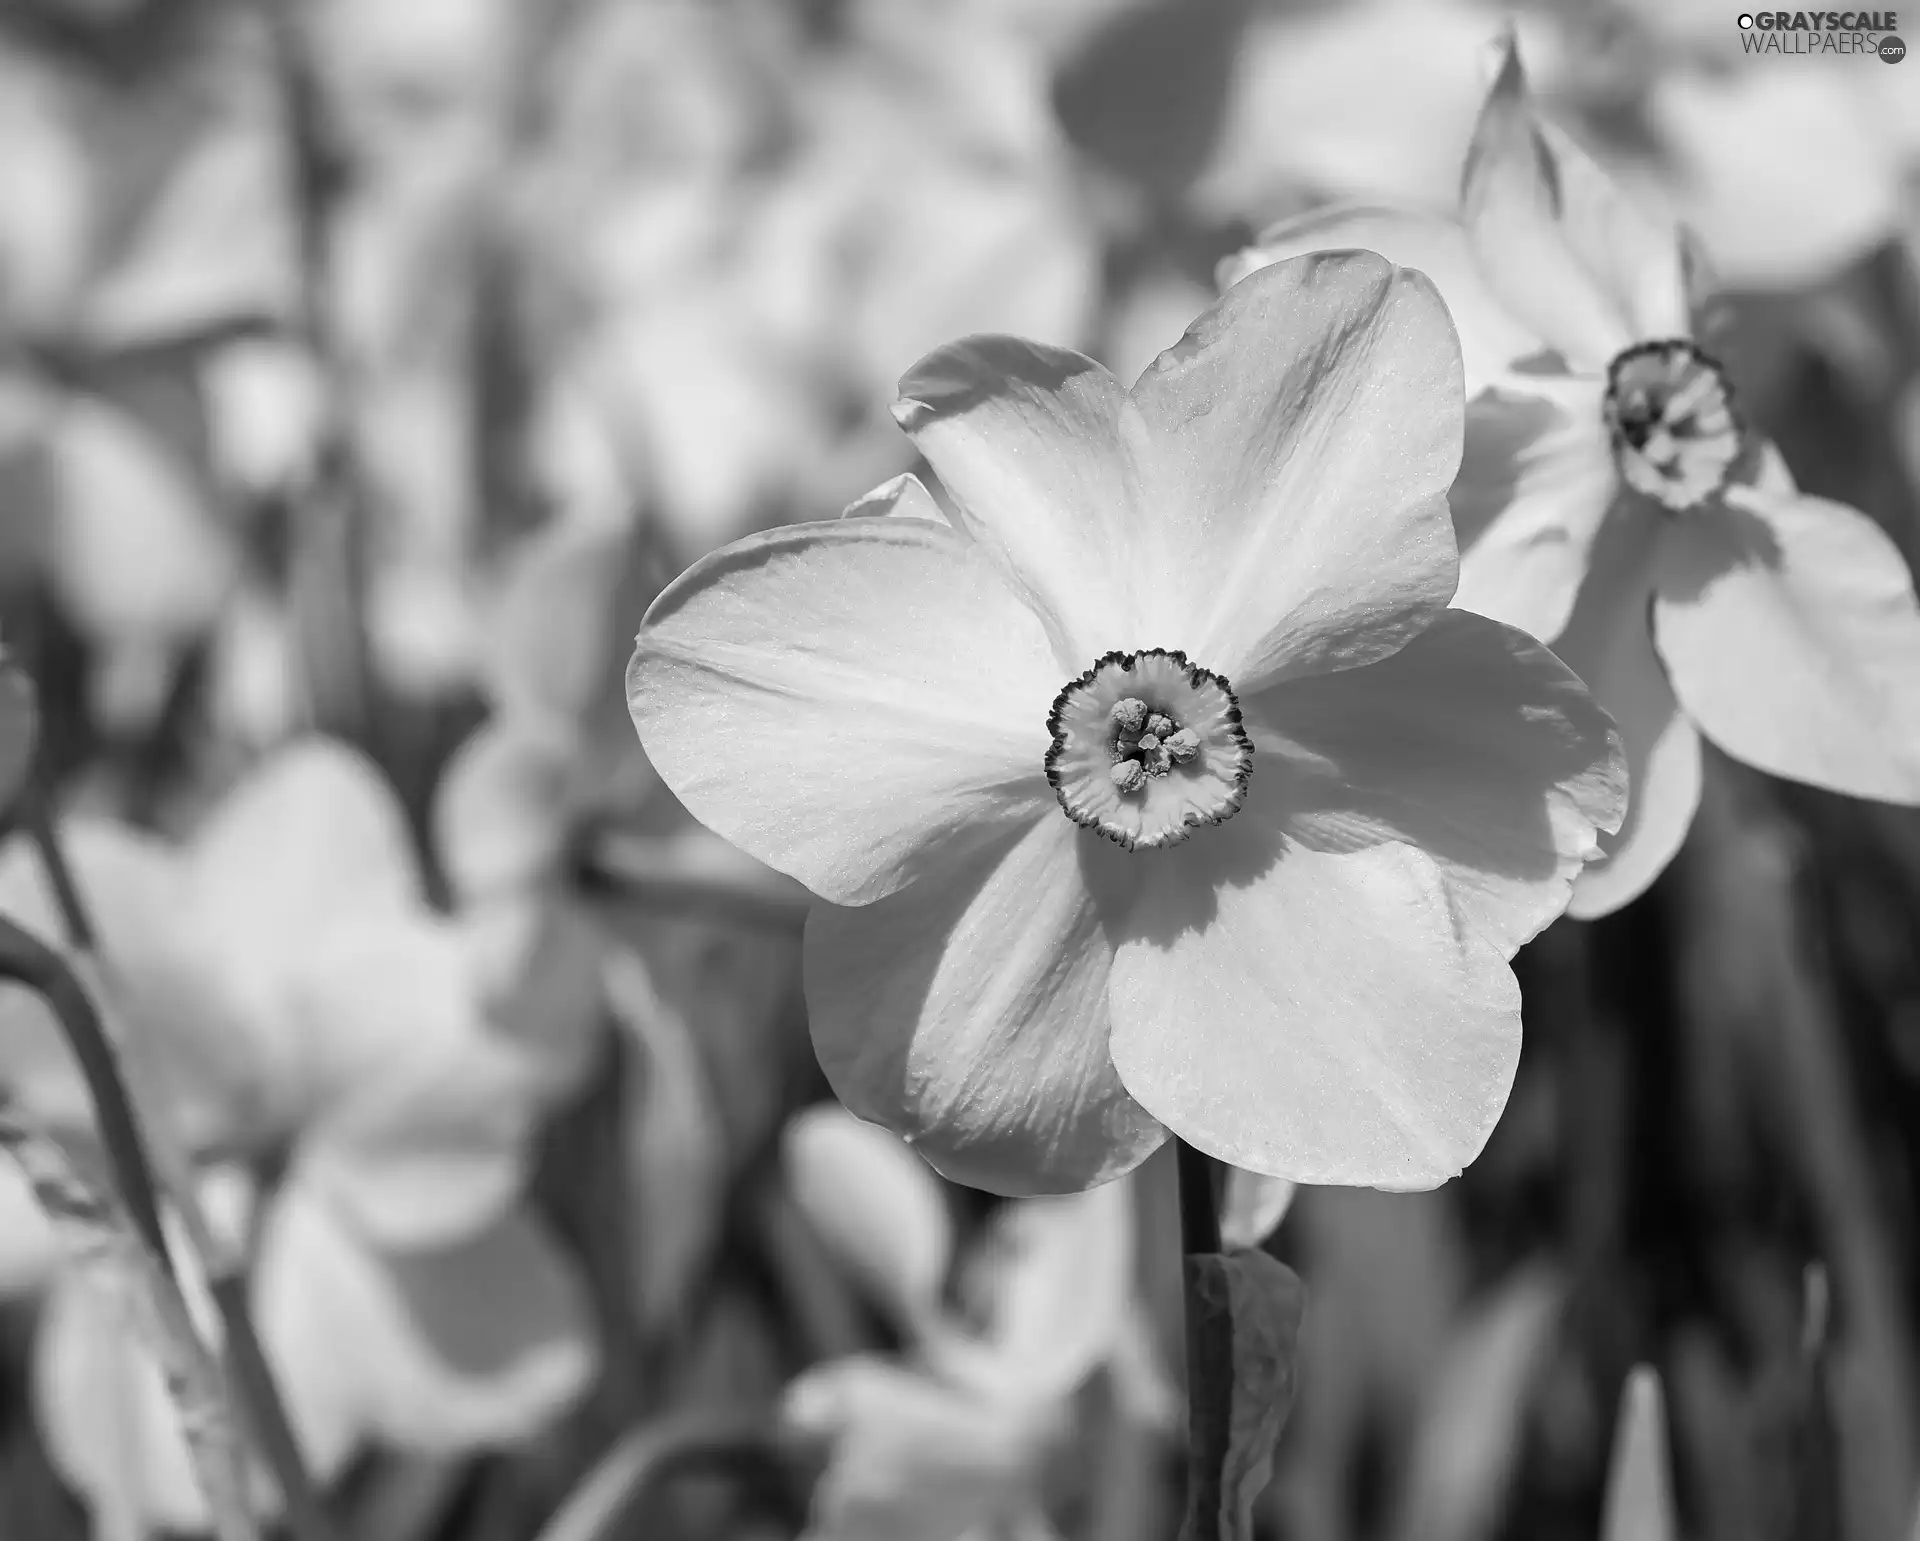 blurry background, Flowers, White Narcissus